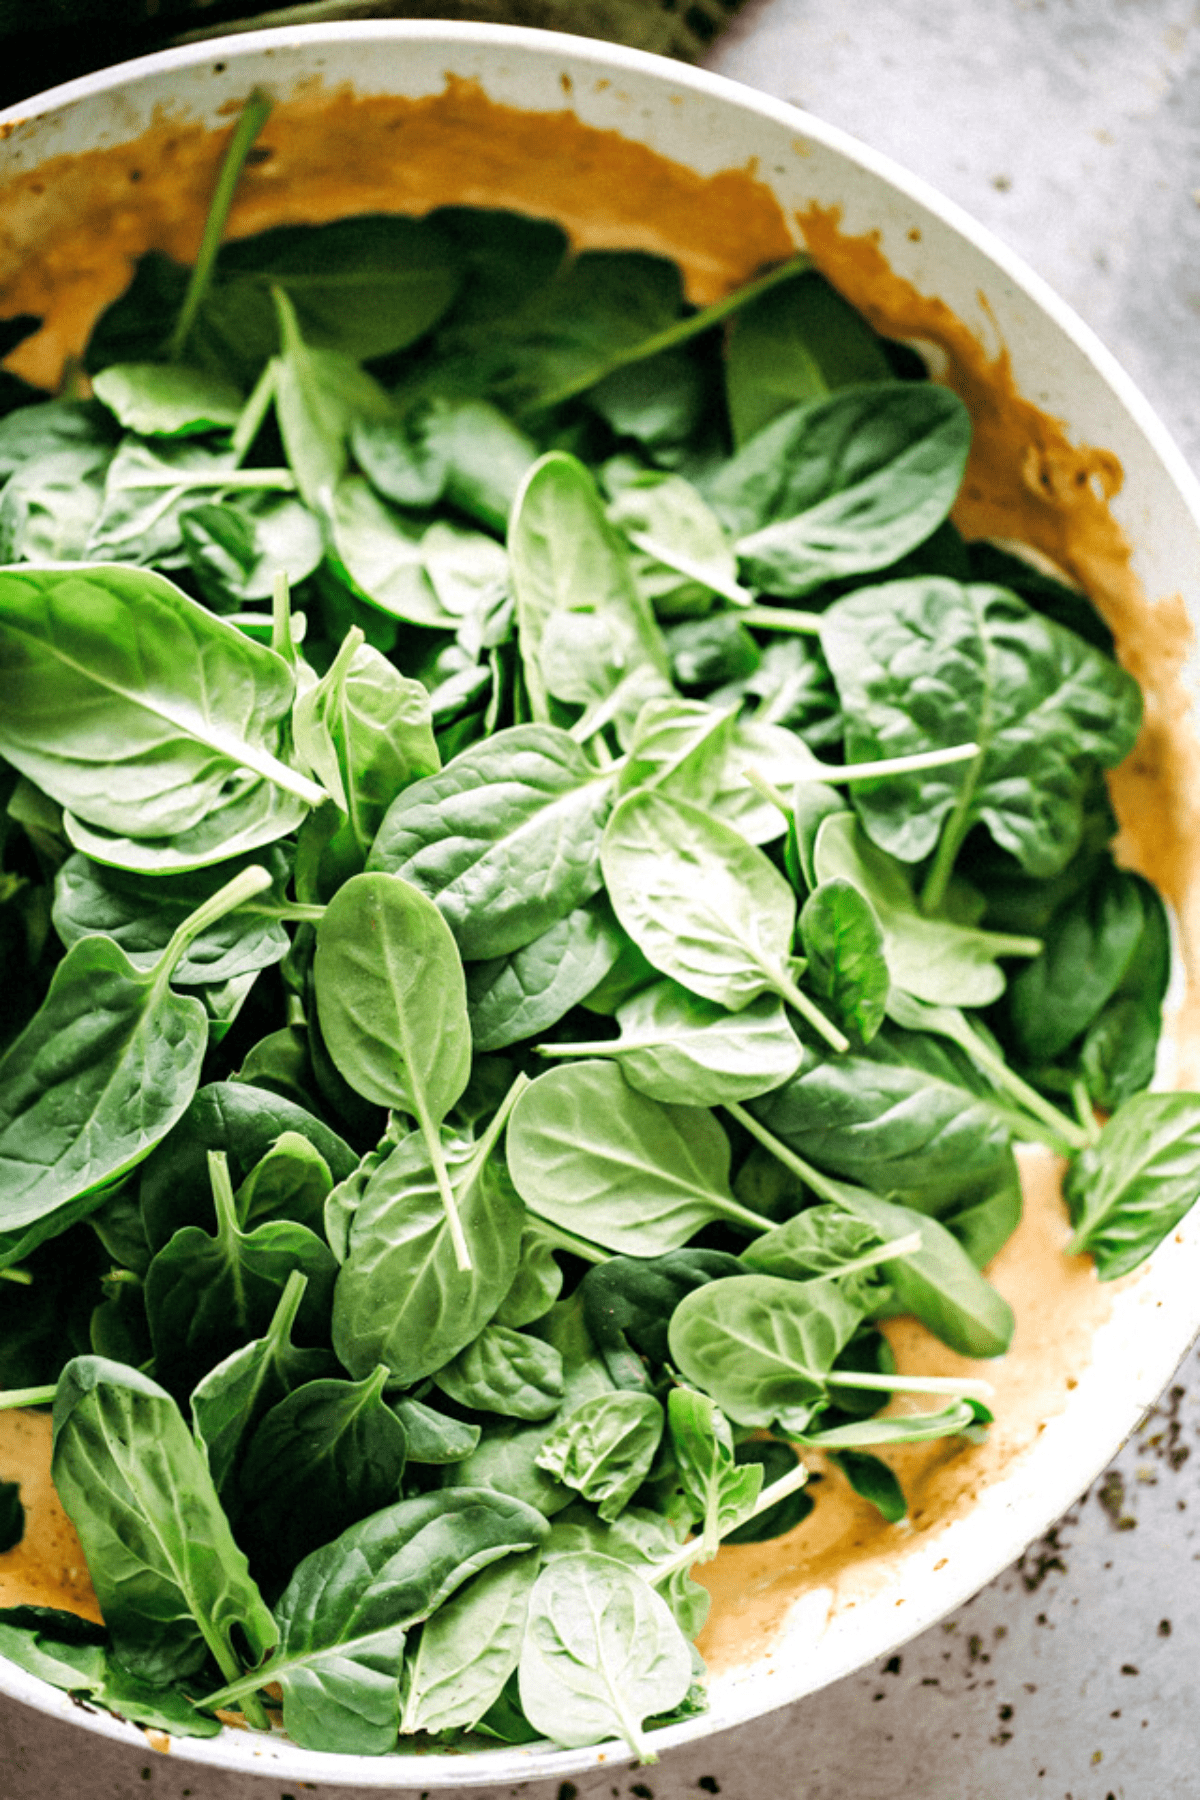 cooking down spinach leaves in a skillet with heavy cream.